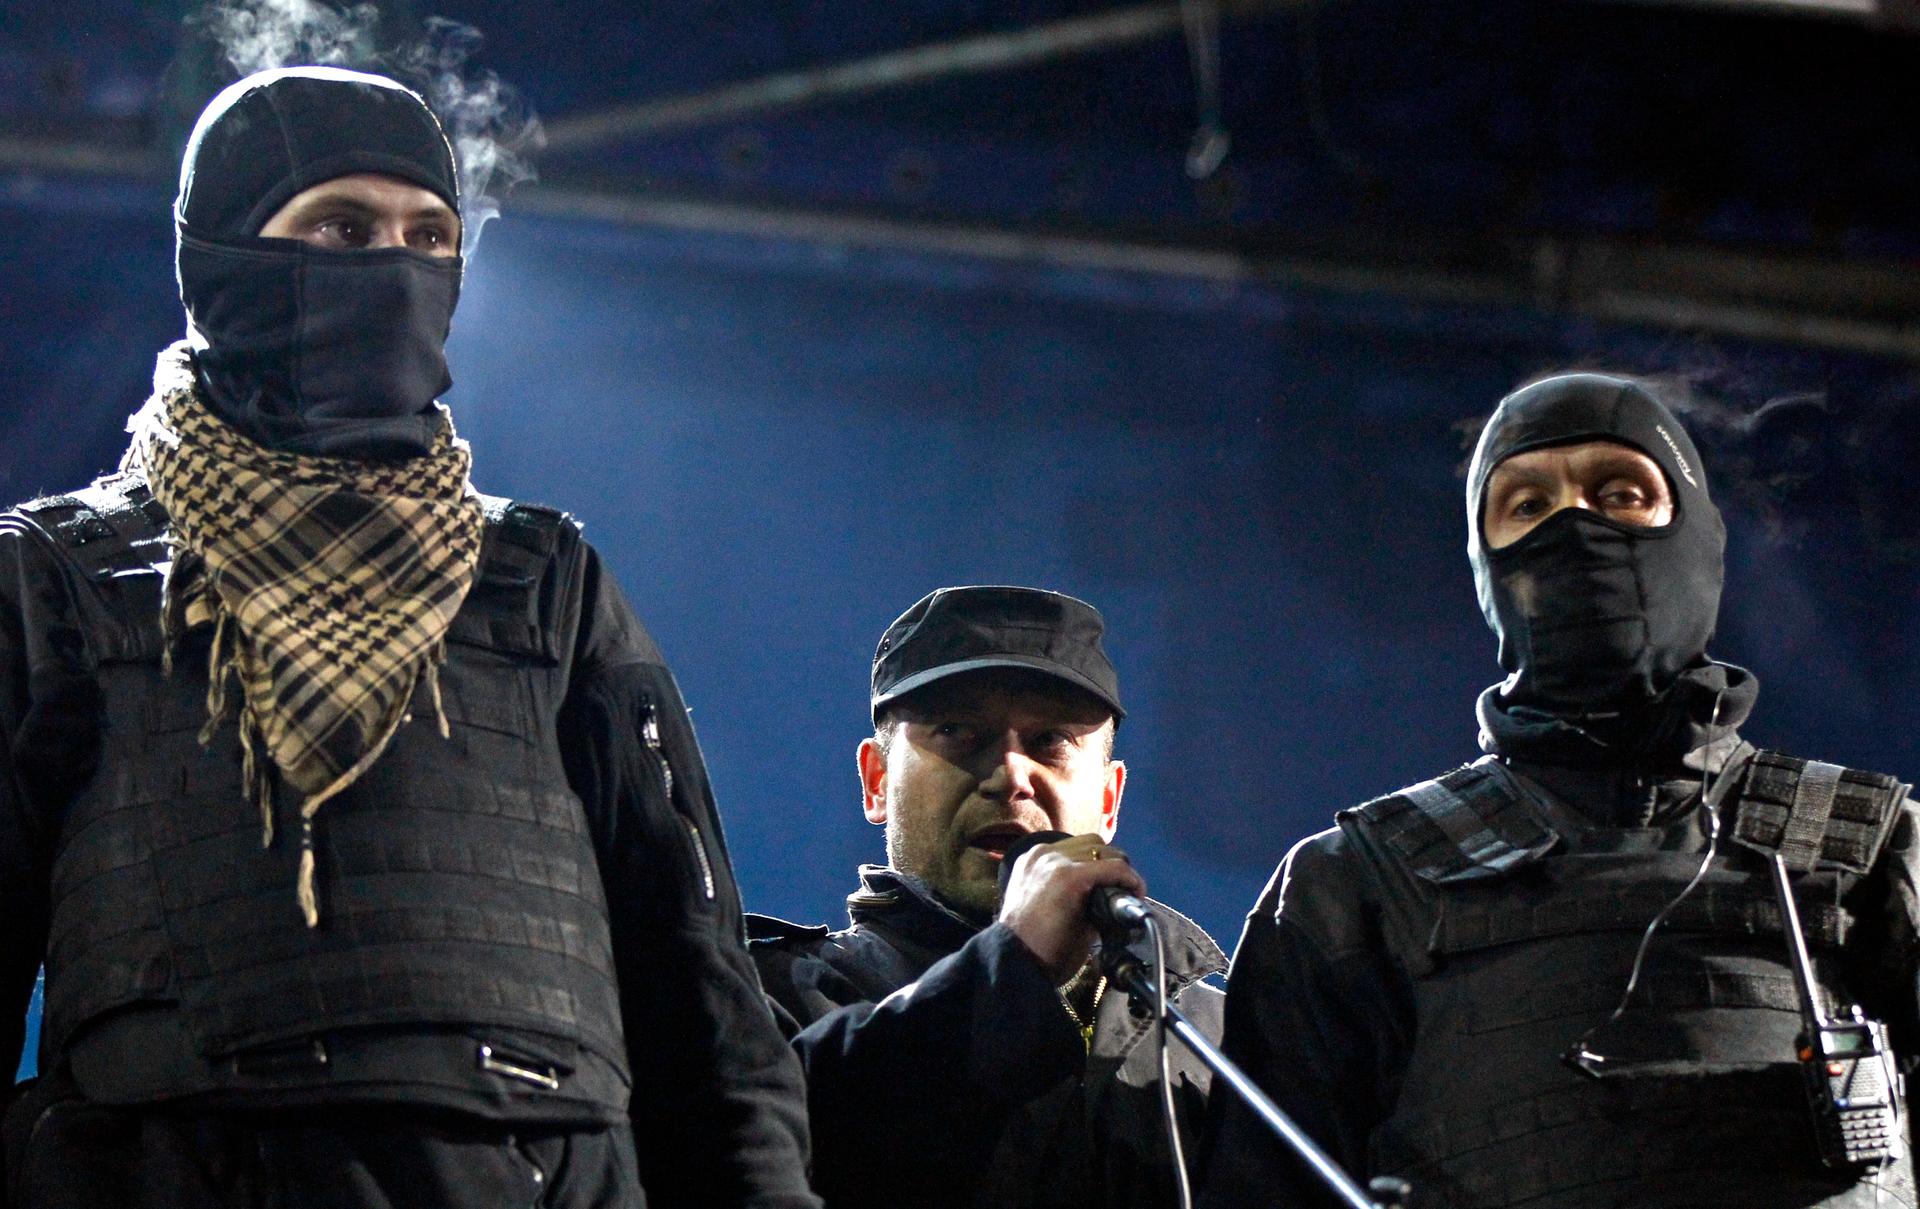 Dmytro Yarosh (center), leader of the Right Sector movement, during a rally in Kiev last month.